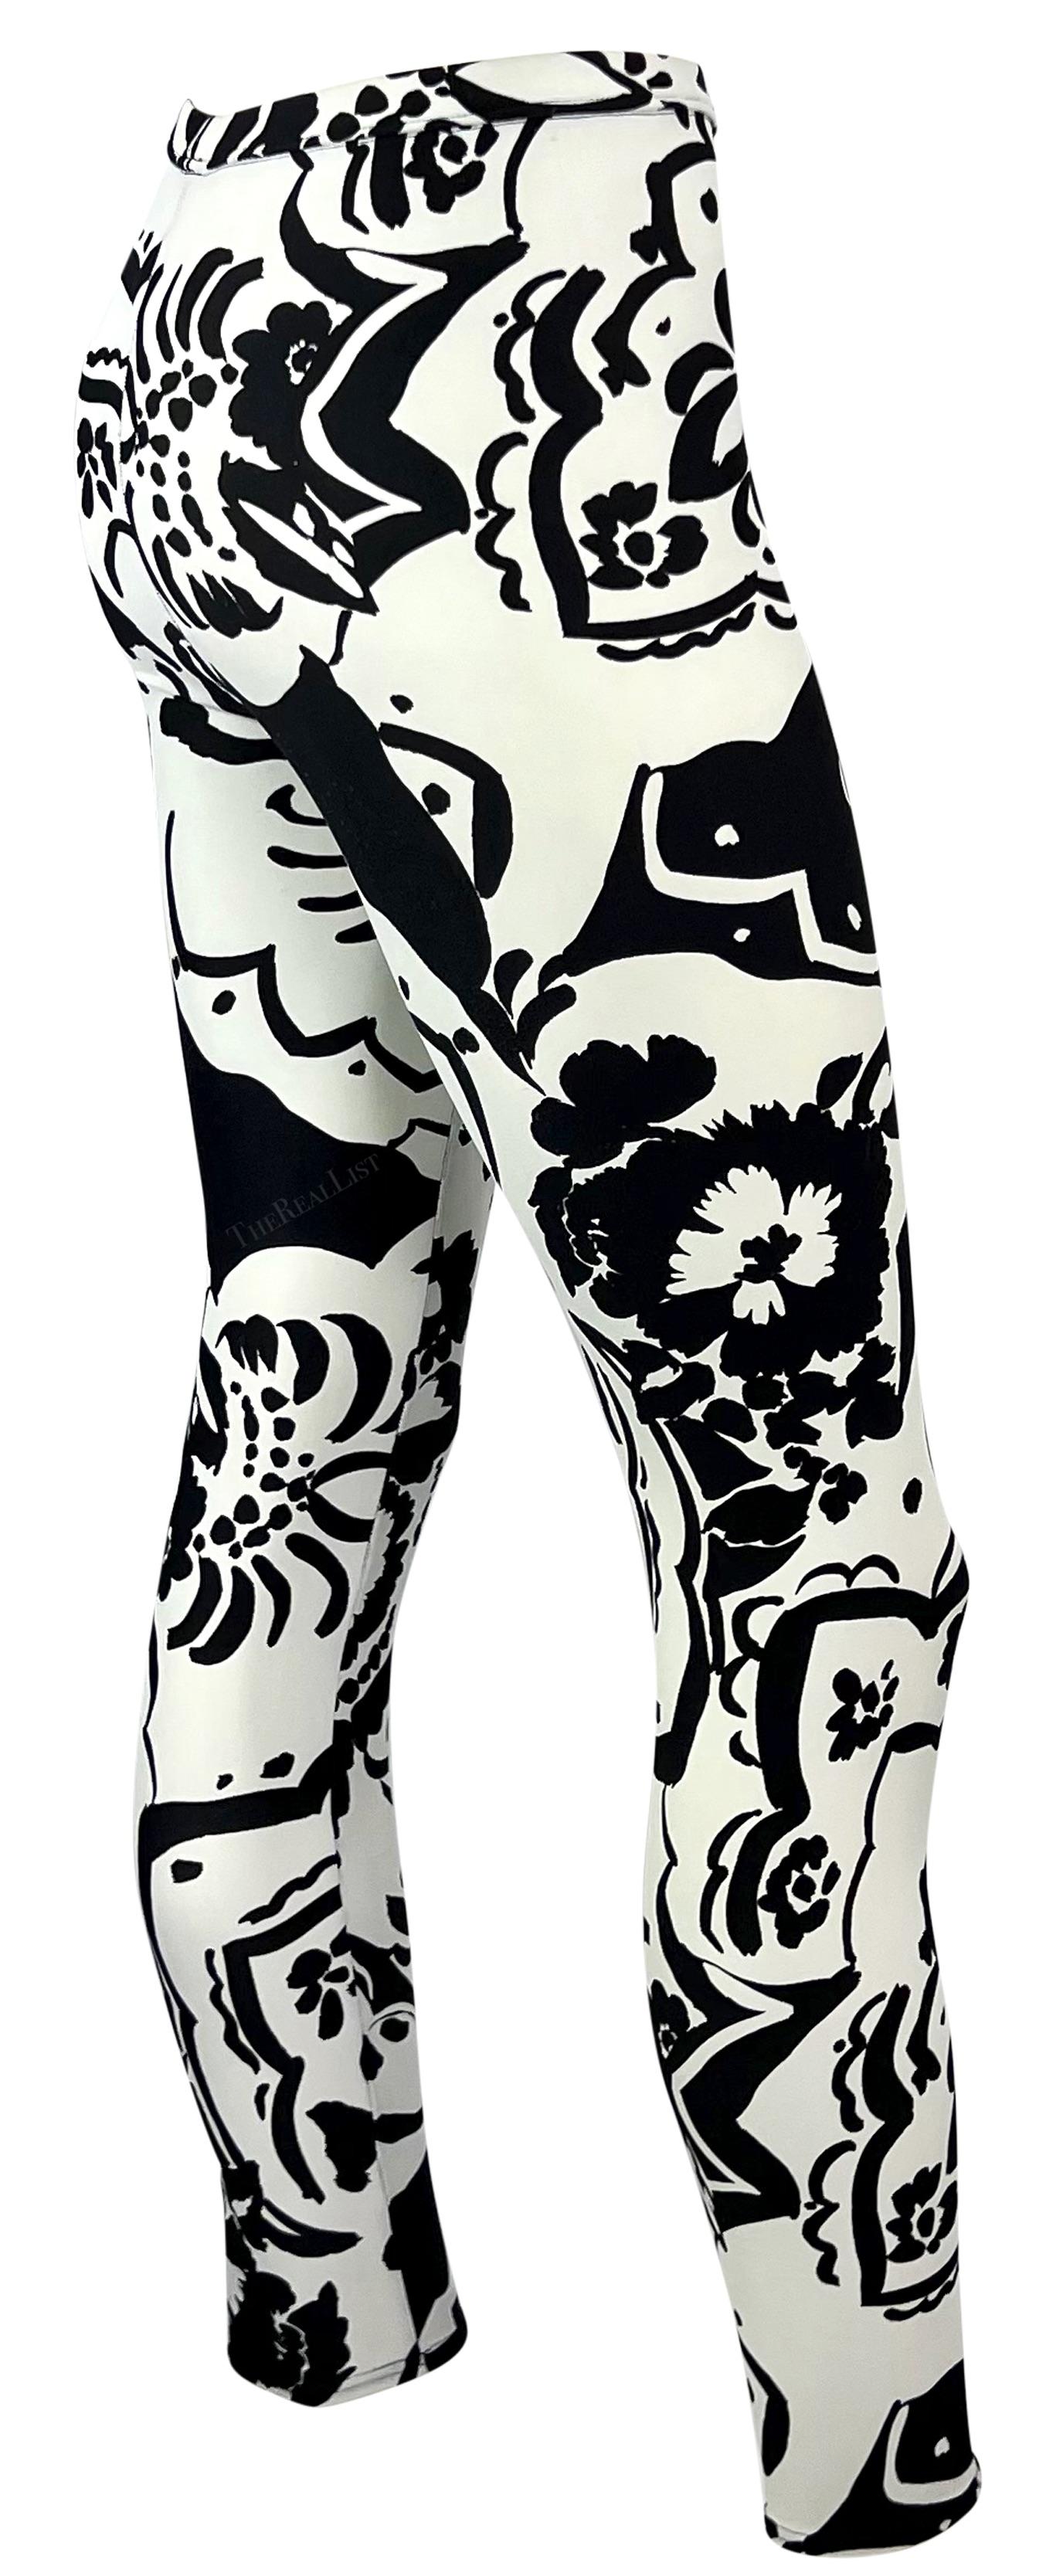 1990 Gianni Versace Black White Abstract Floral Leggings Tights For Sale 1